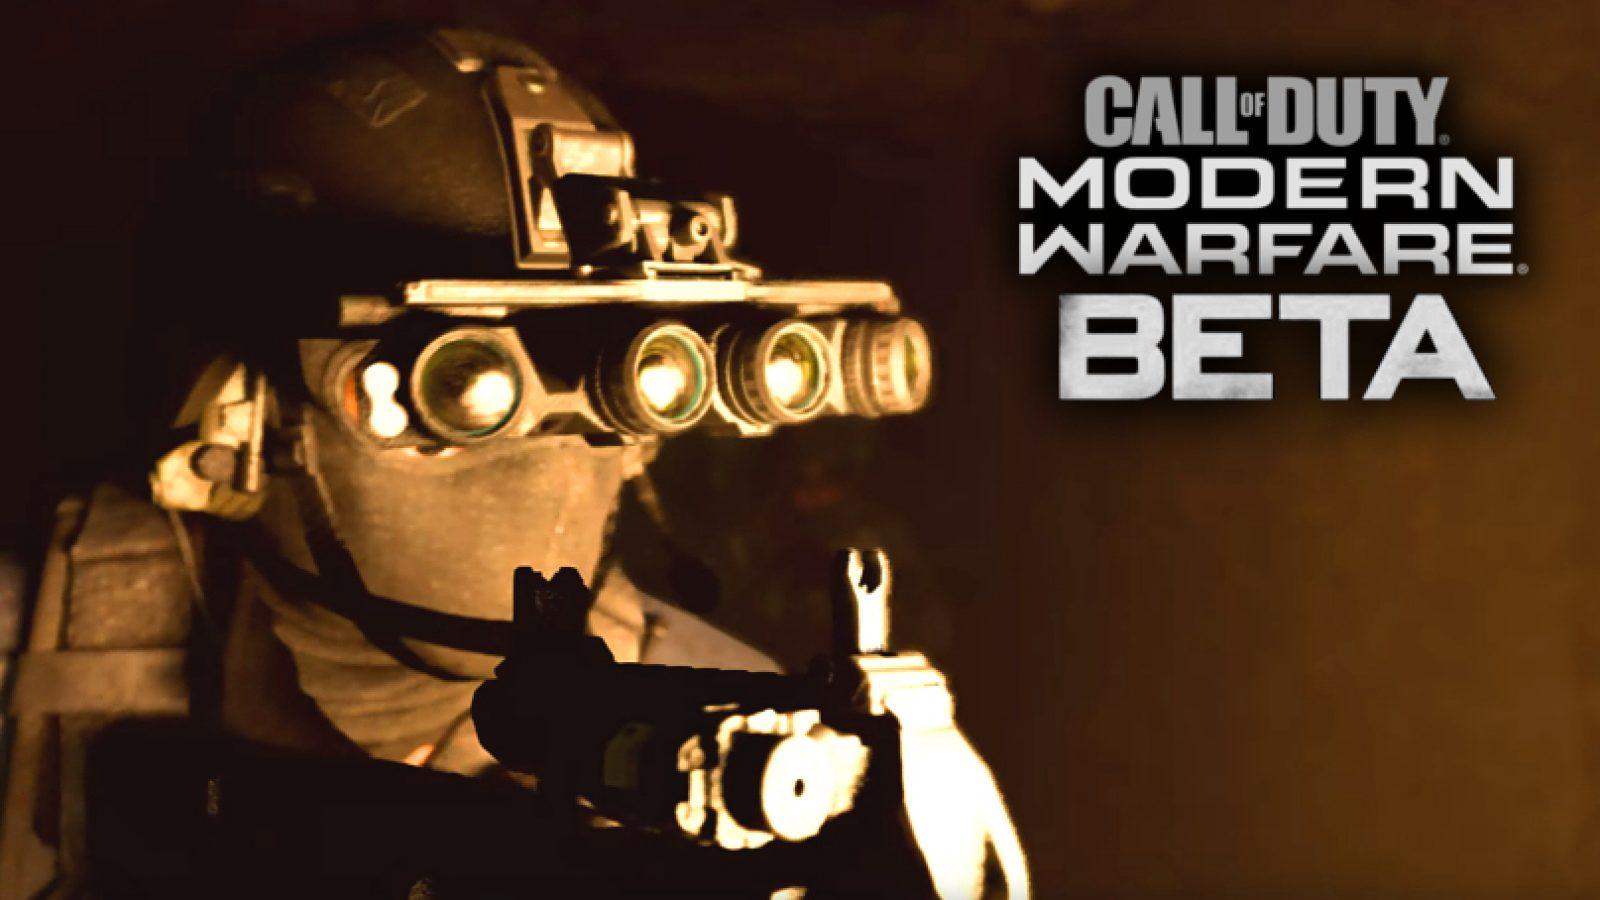 How to play Modern Warfare 2 Multiplayer Open Beta: Release date